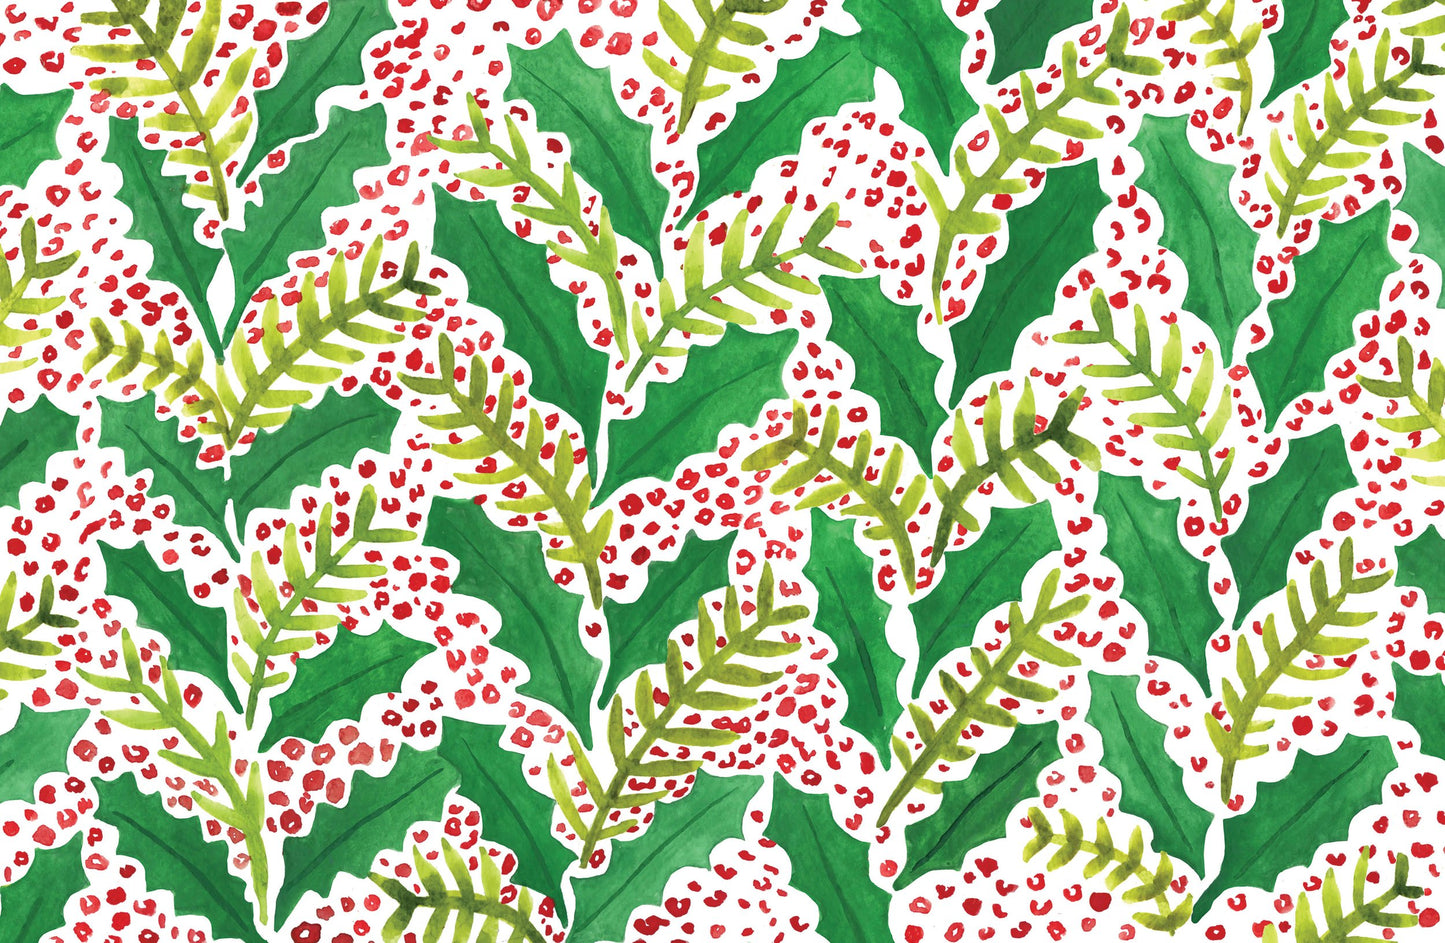 Holly patterned paper placemat